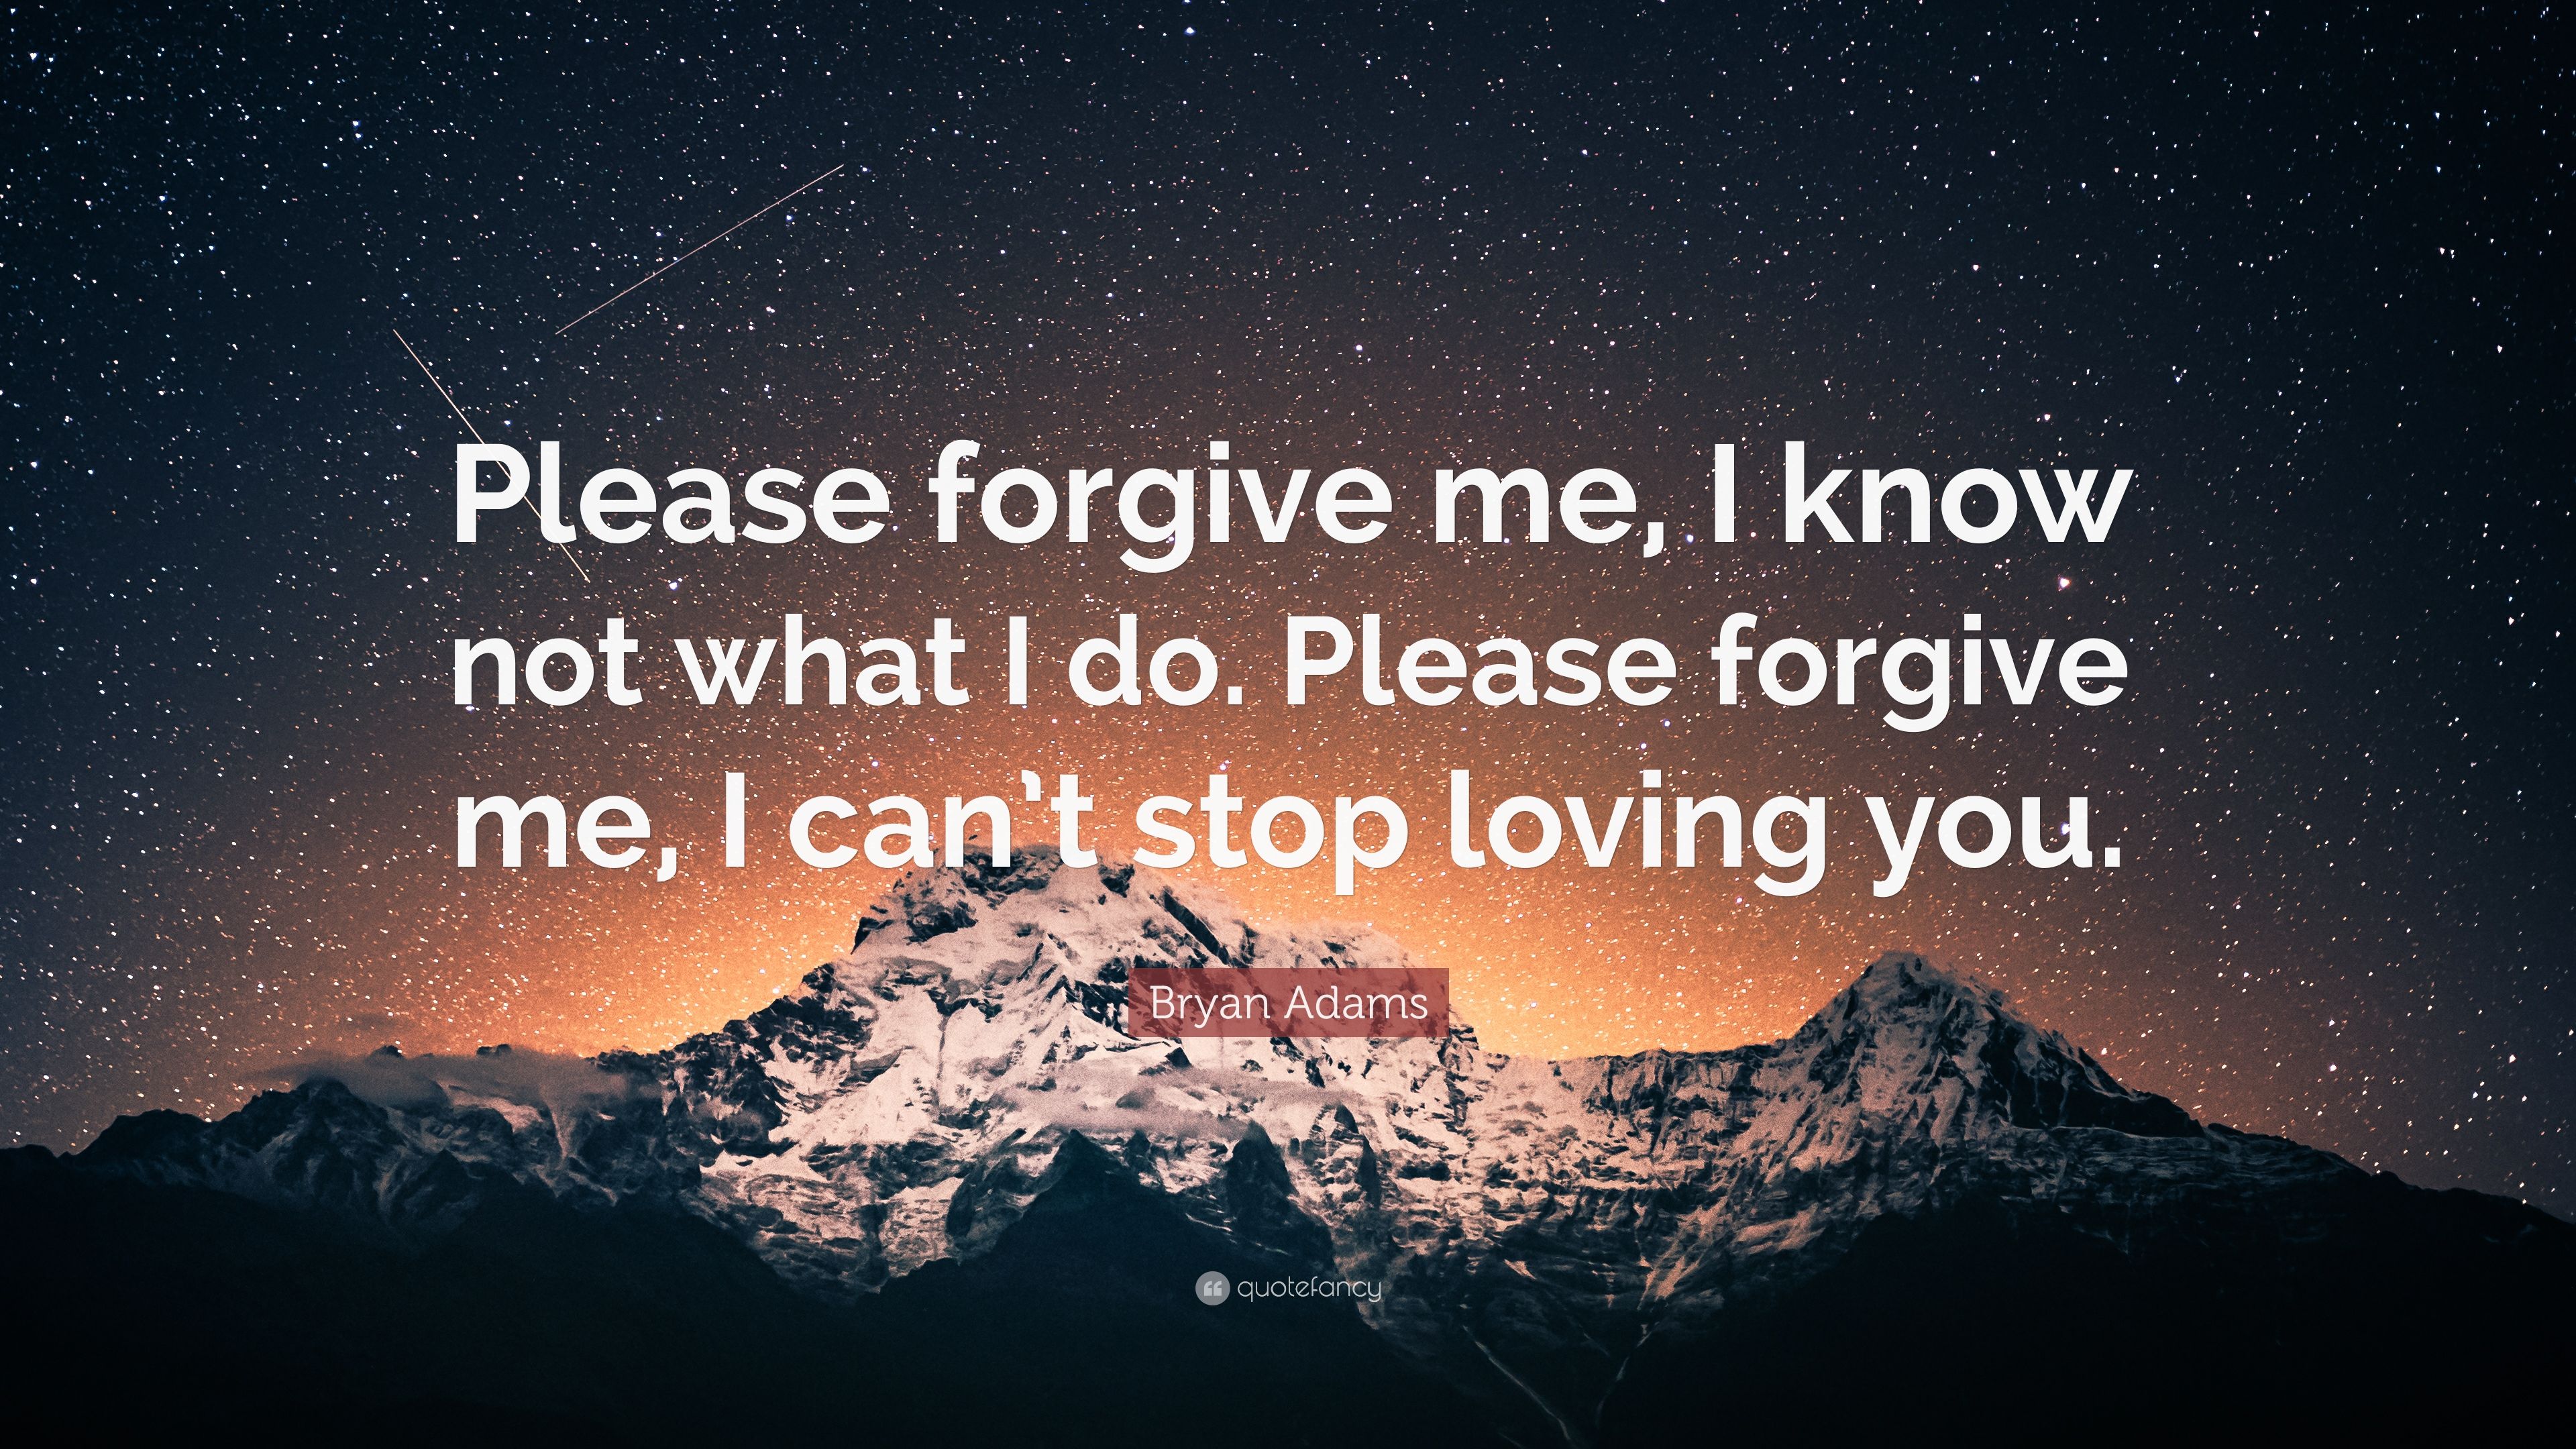 Bryan Adams Quote: “Please forgive me, I know not what I do. Please ...